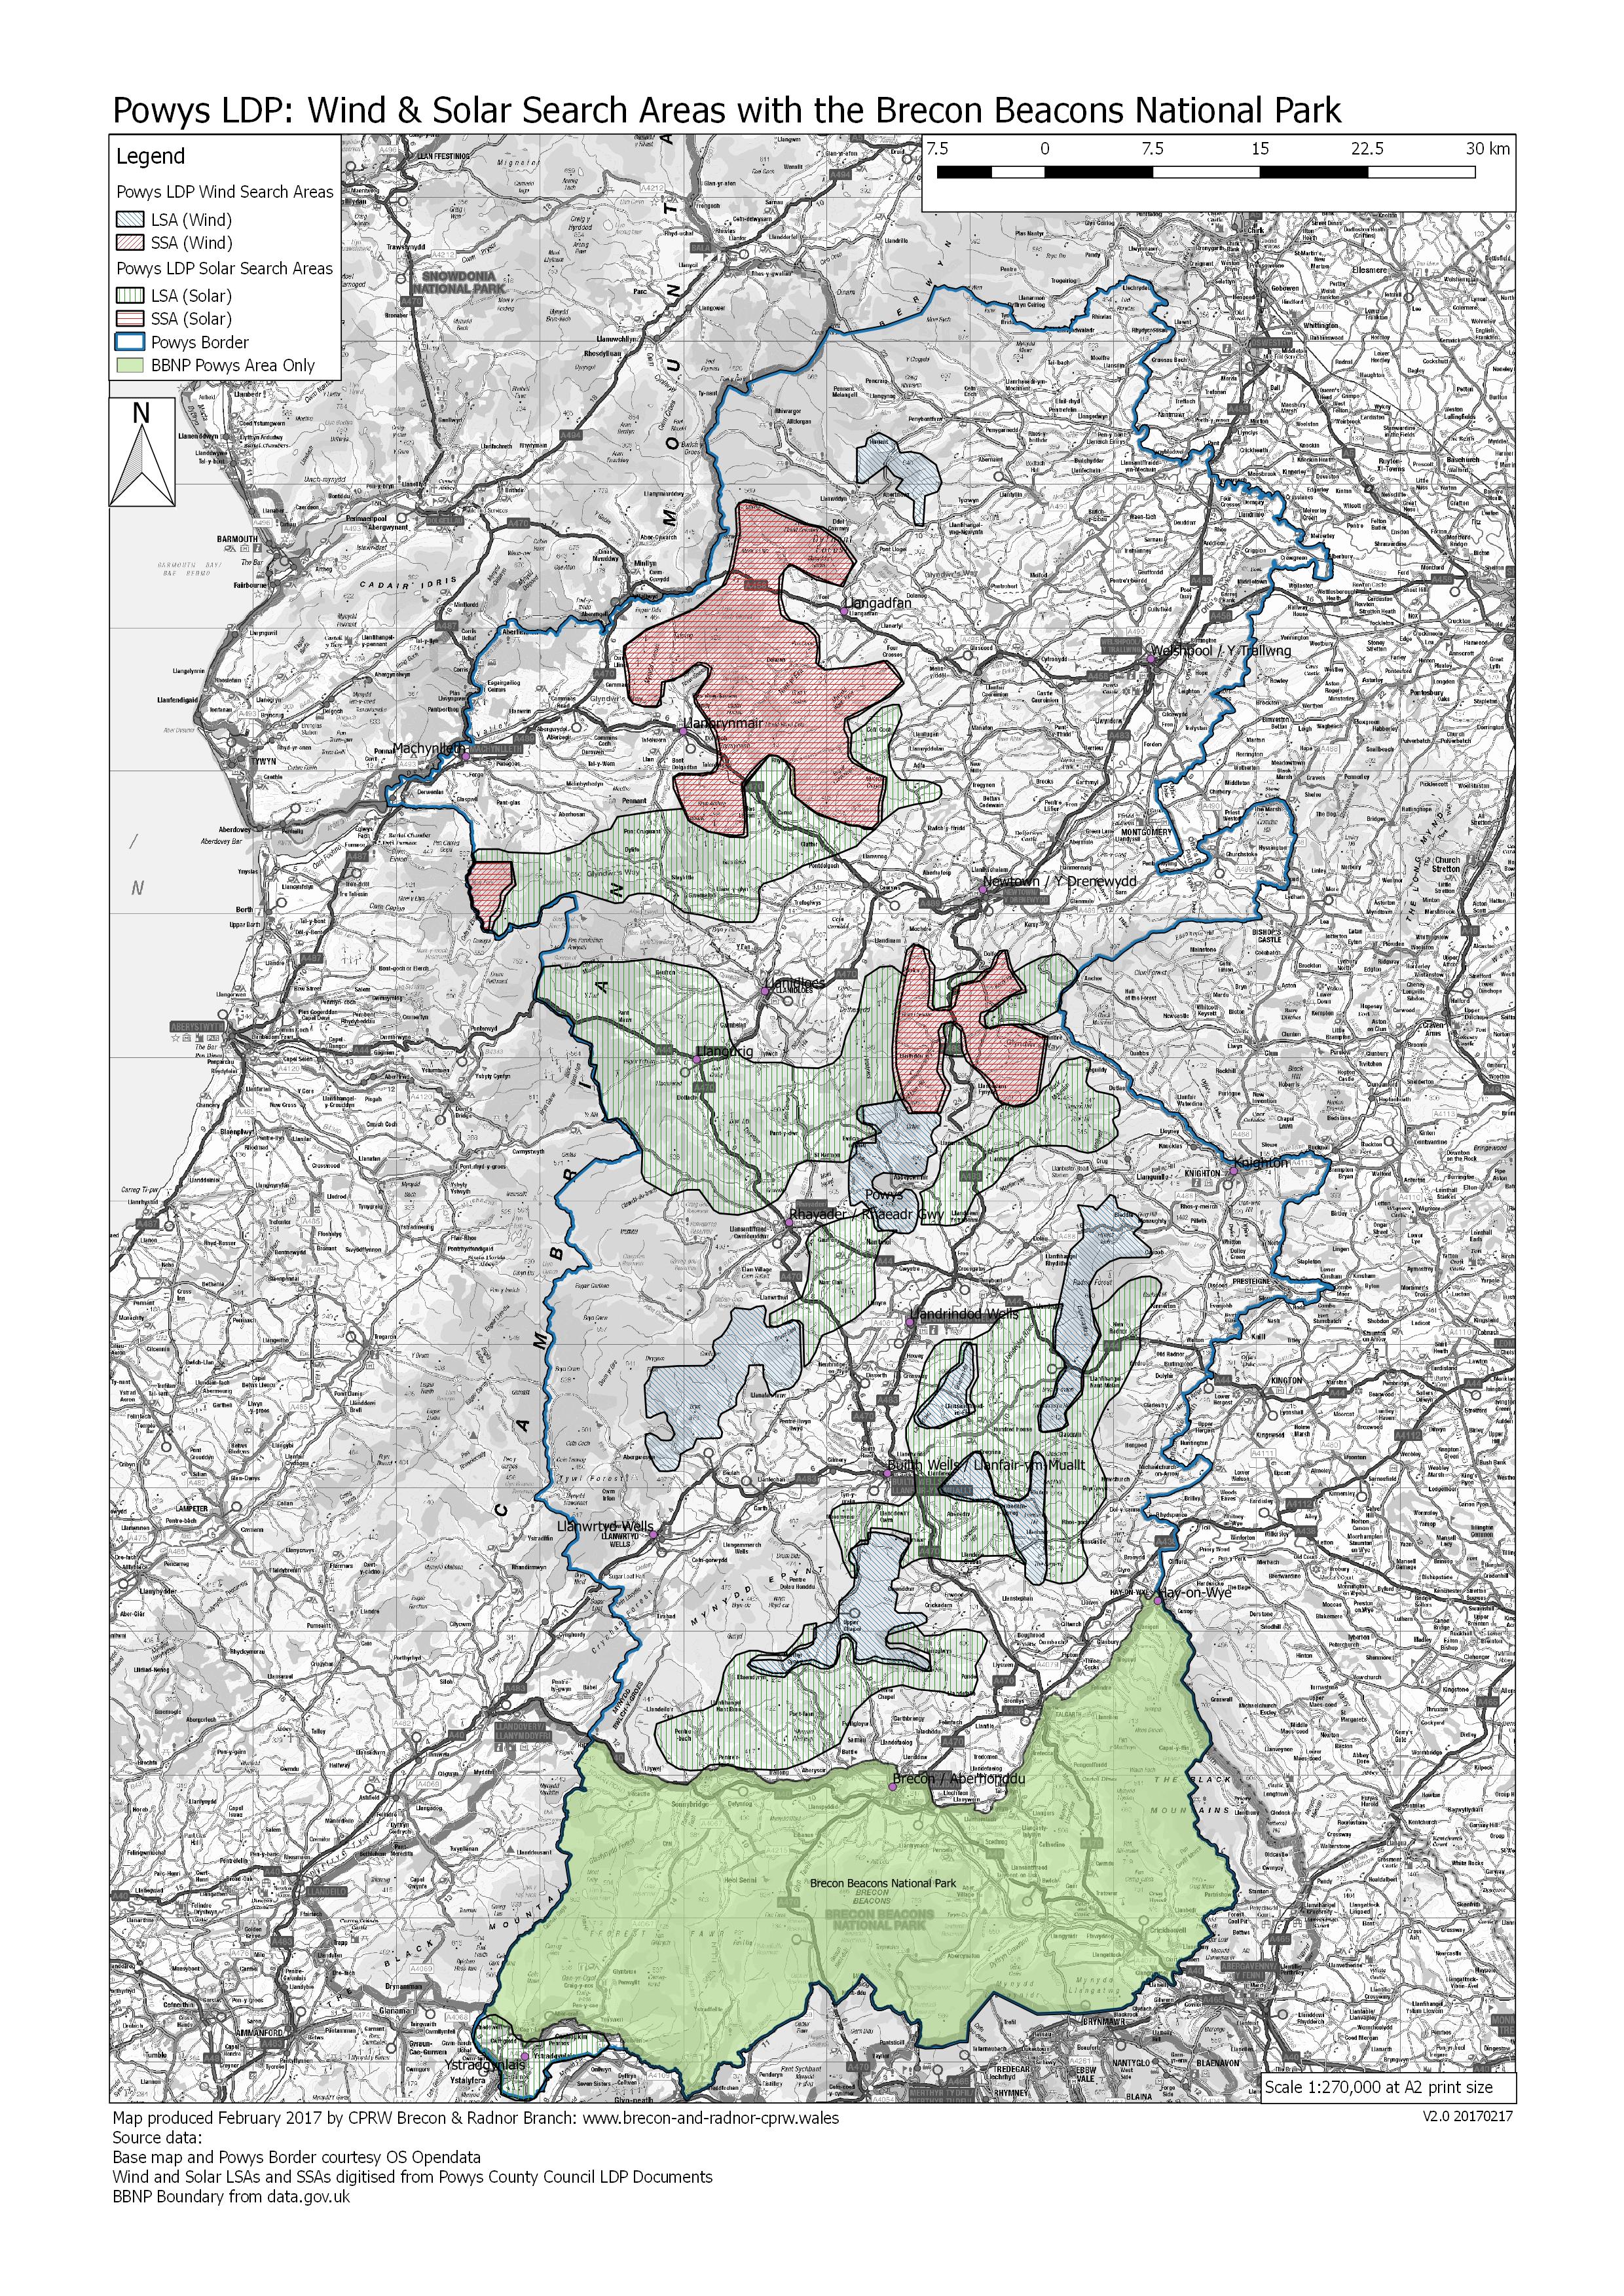 Map 1: Powys LDP area: Proposed Wind & Solar Local Search Areas in relation to the Brecon Beacons National Park